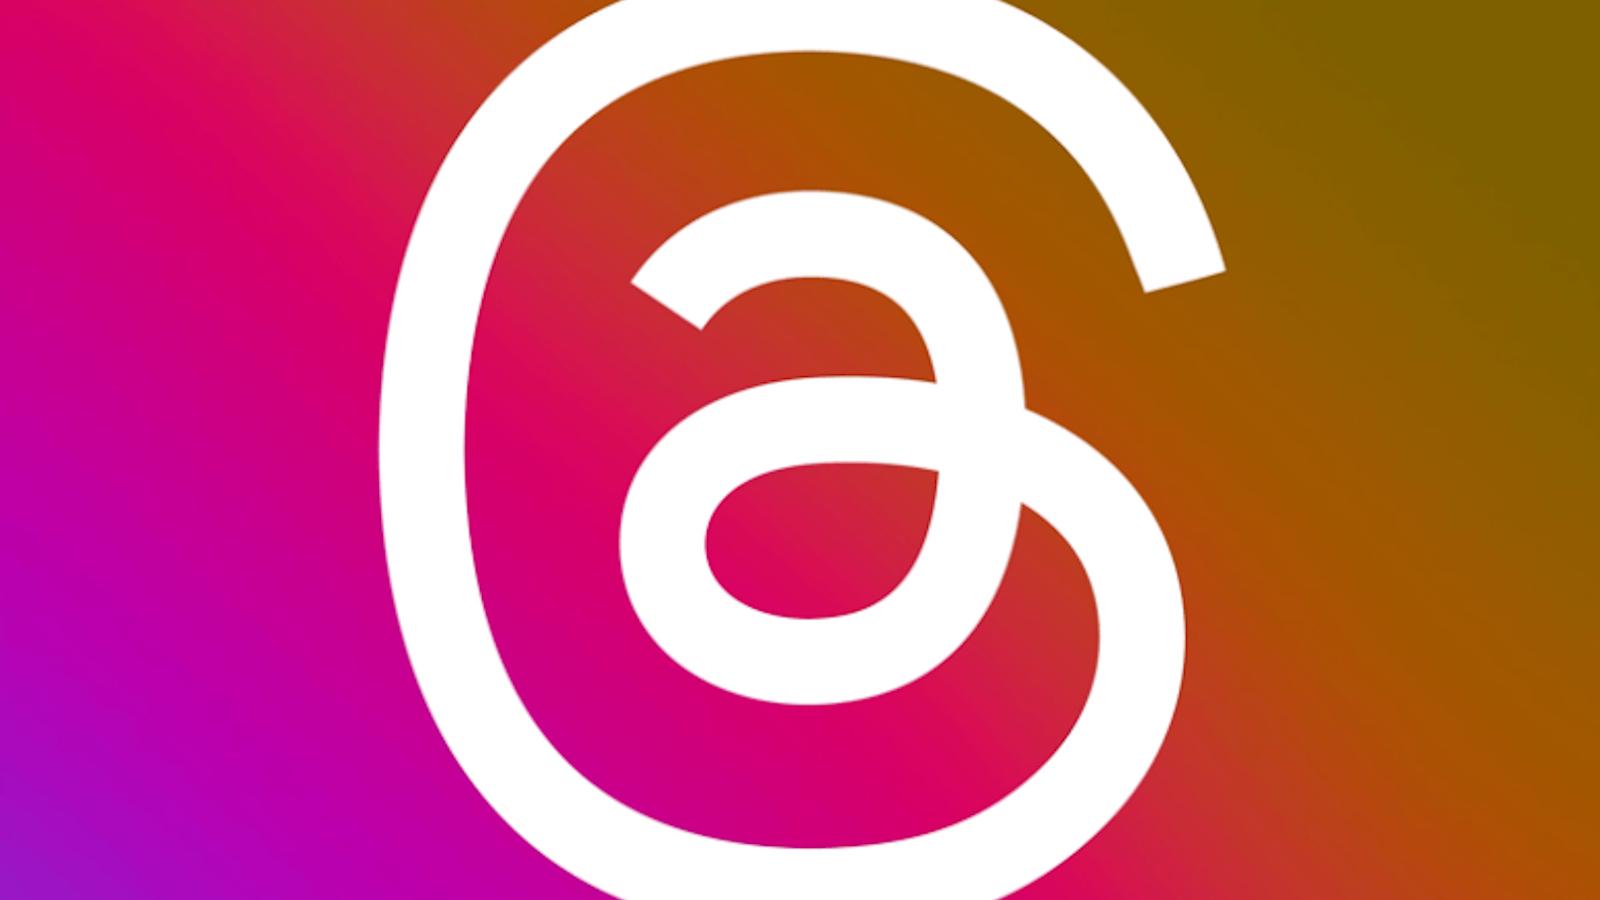 TikTok Launches Text Competitor to Twitter, Instagram Threads